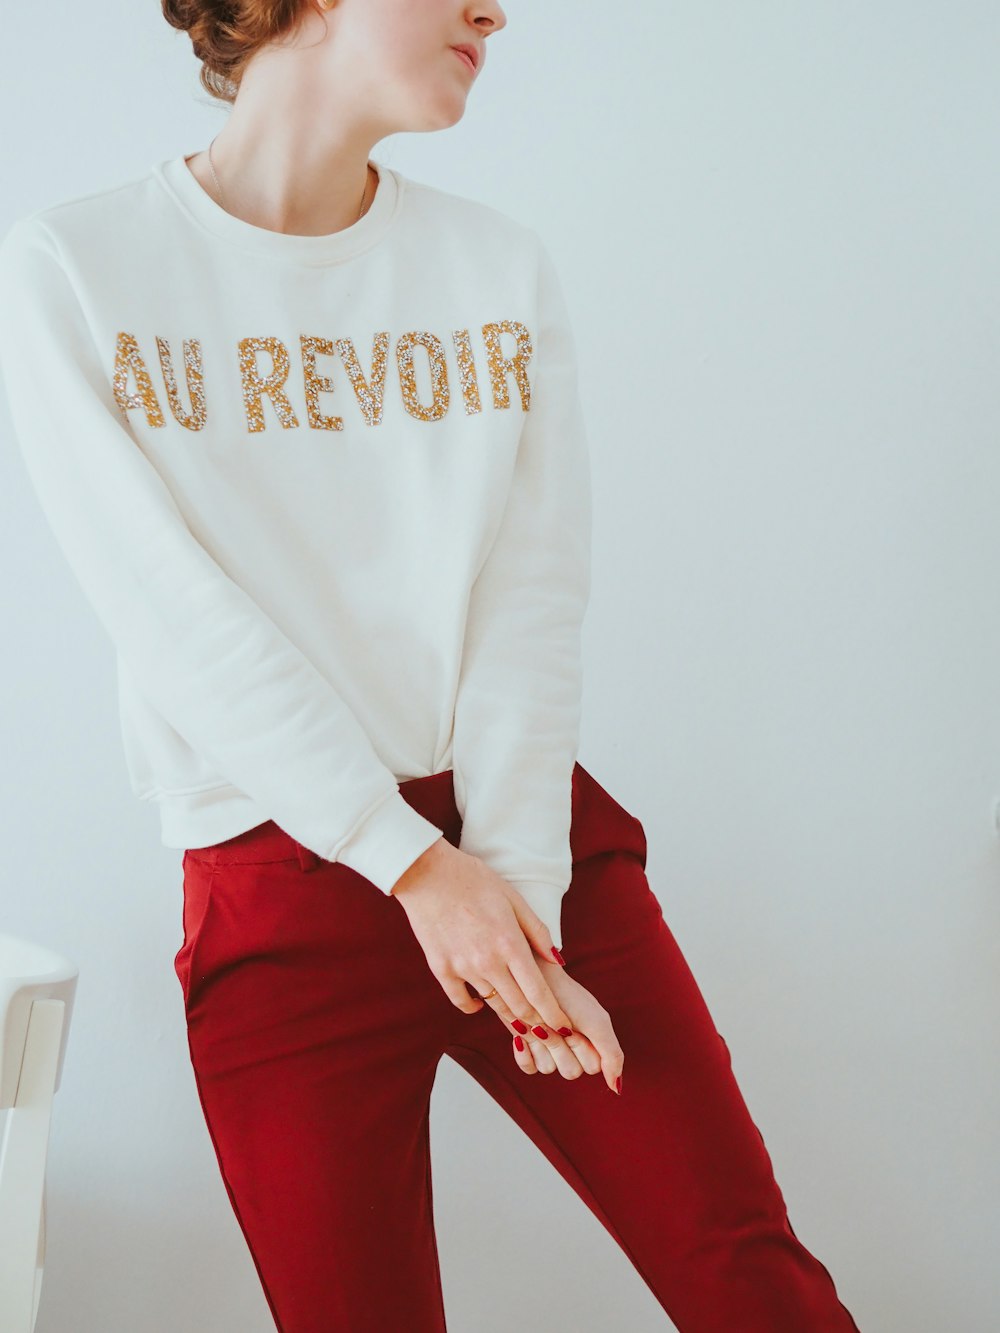 Girl in white long sleeve shirt and red pants photo – Free Vereinigtes  königreich Image on Unsplash